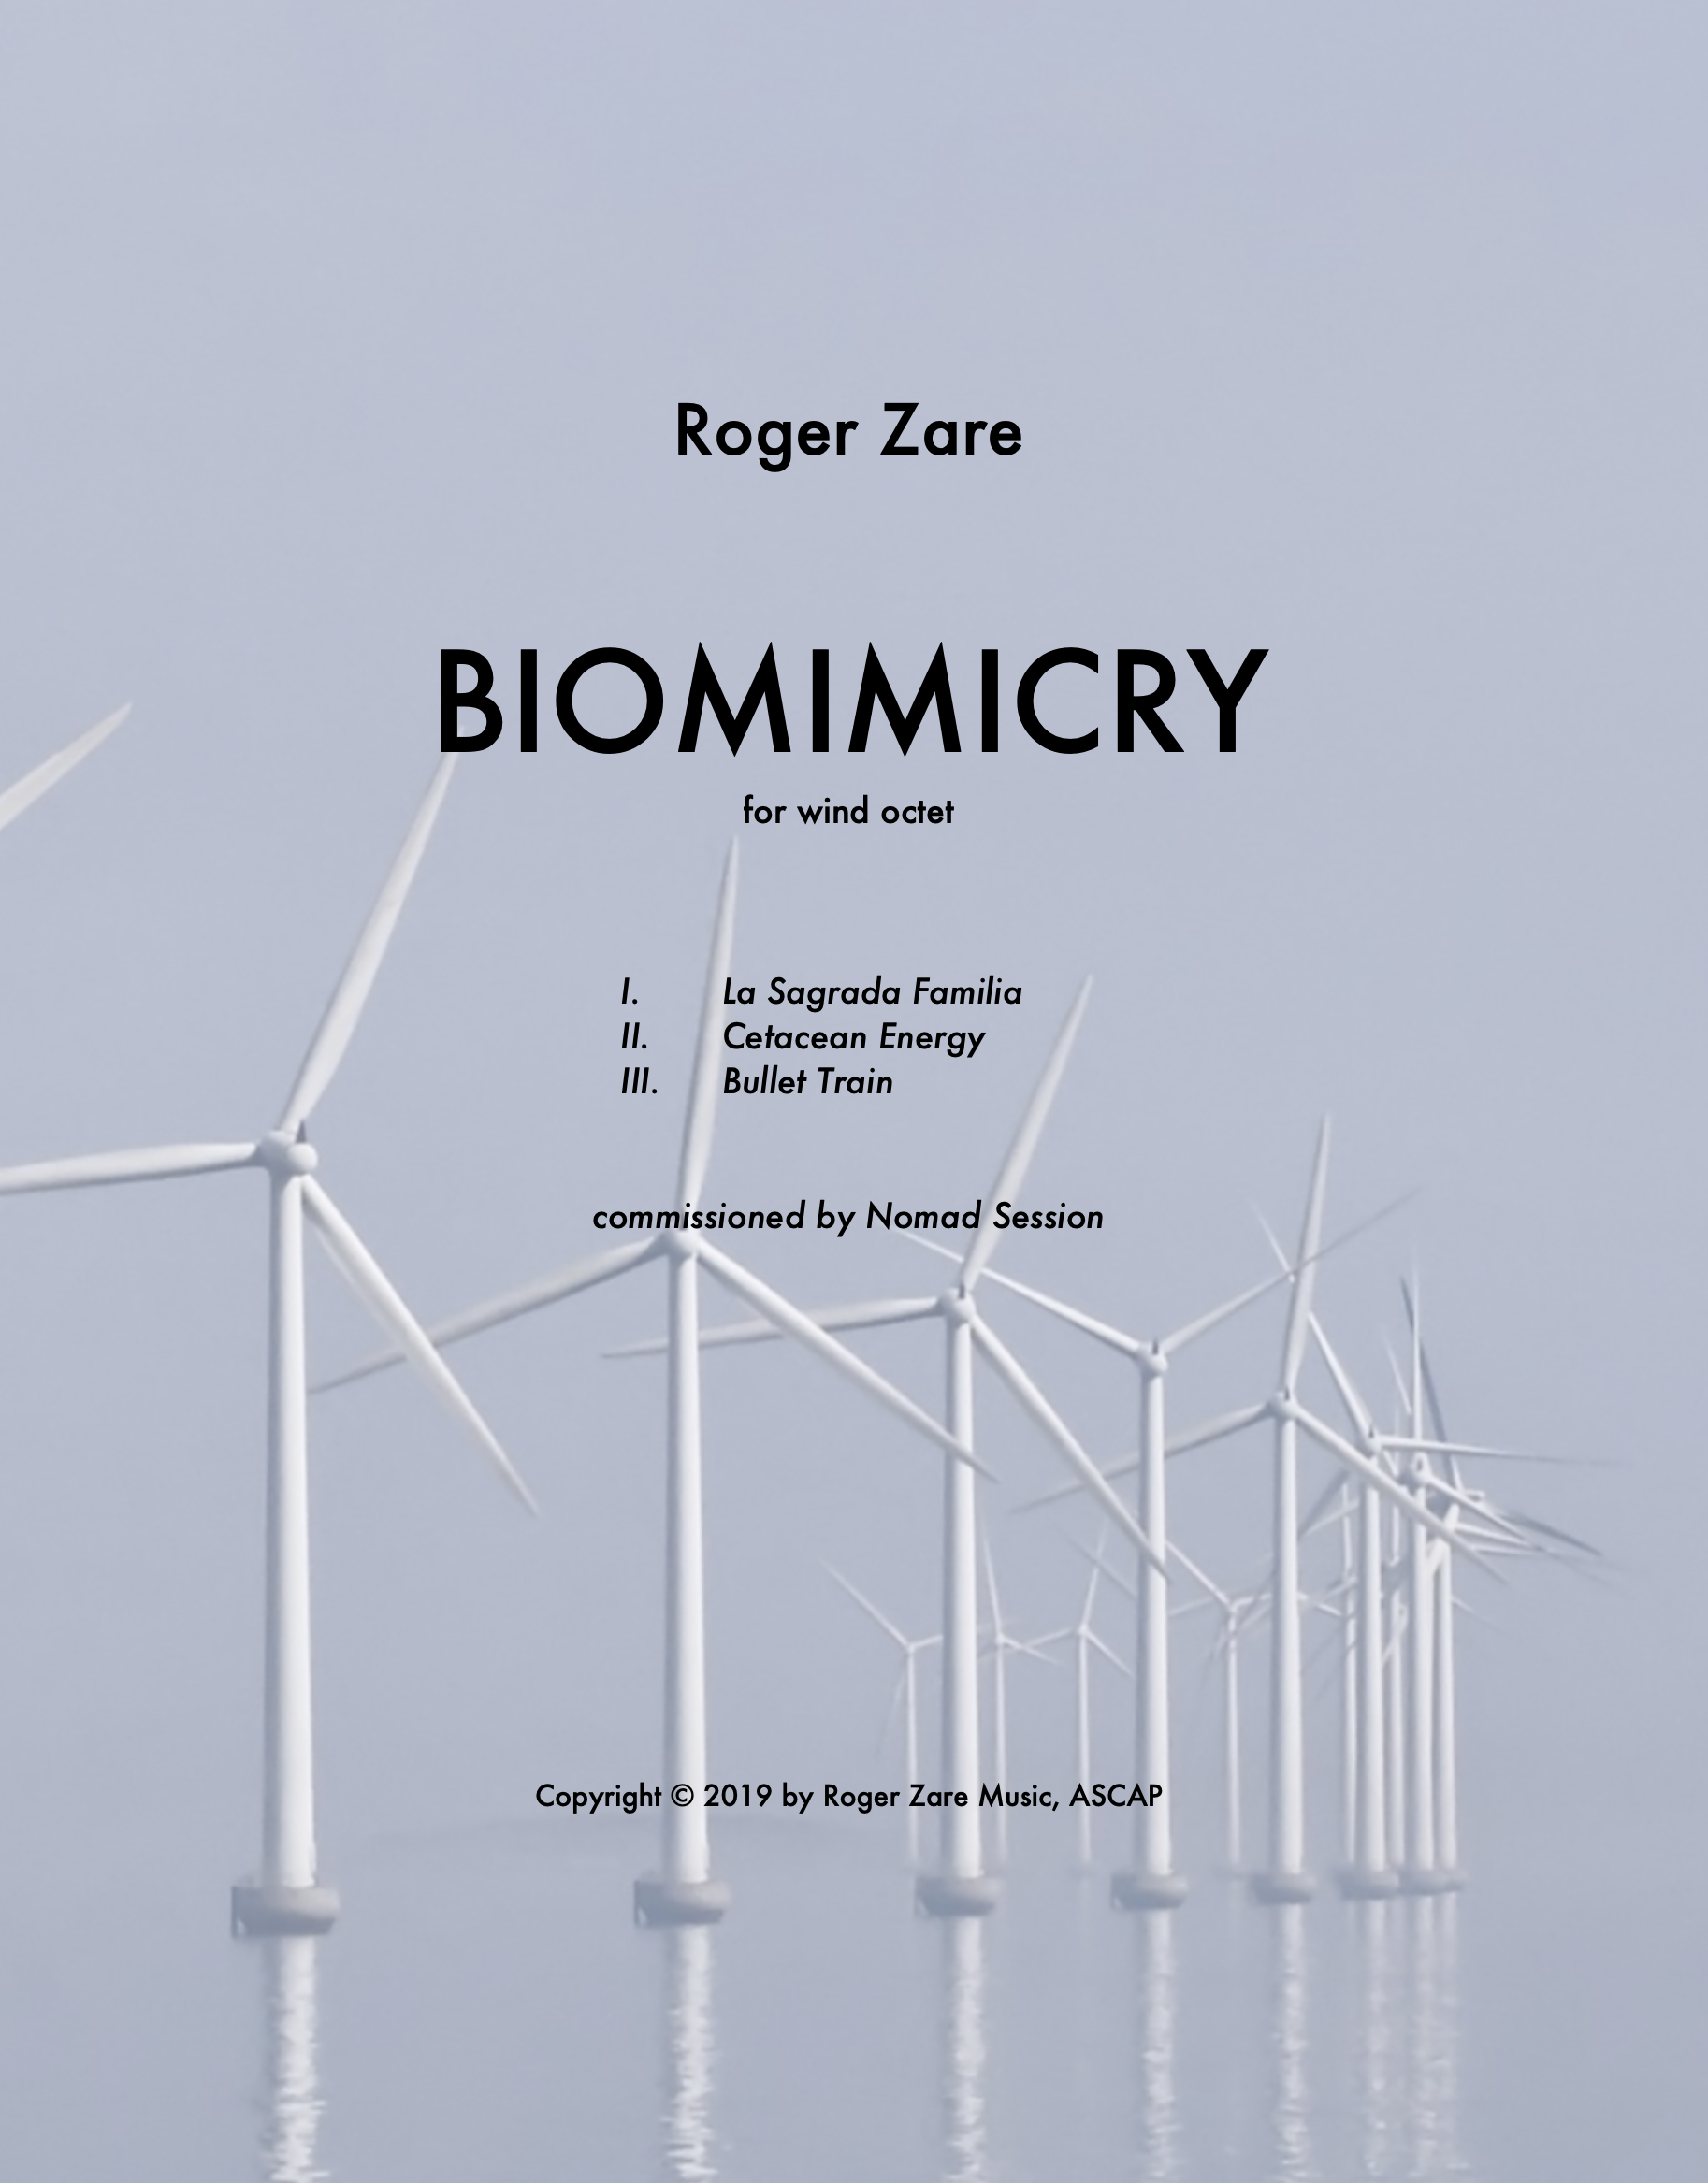 Biomimicry by Roger Zare